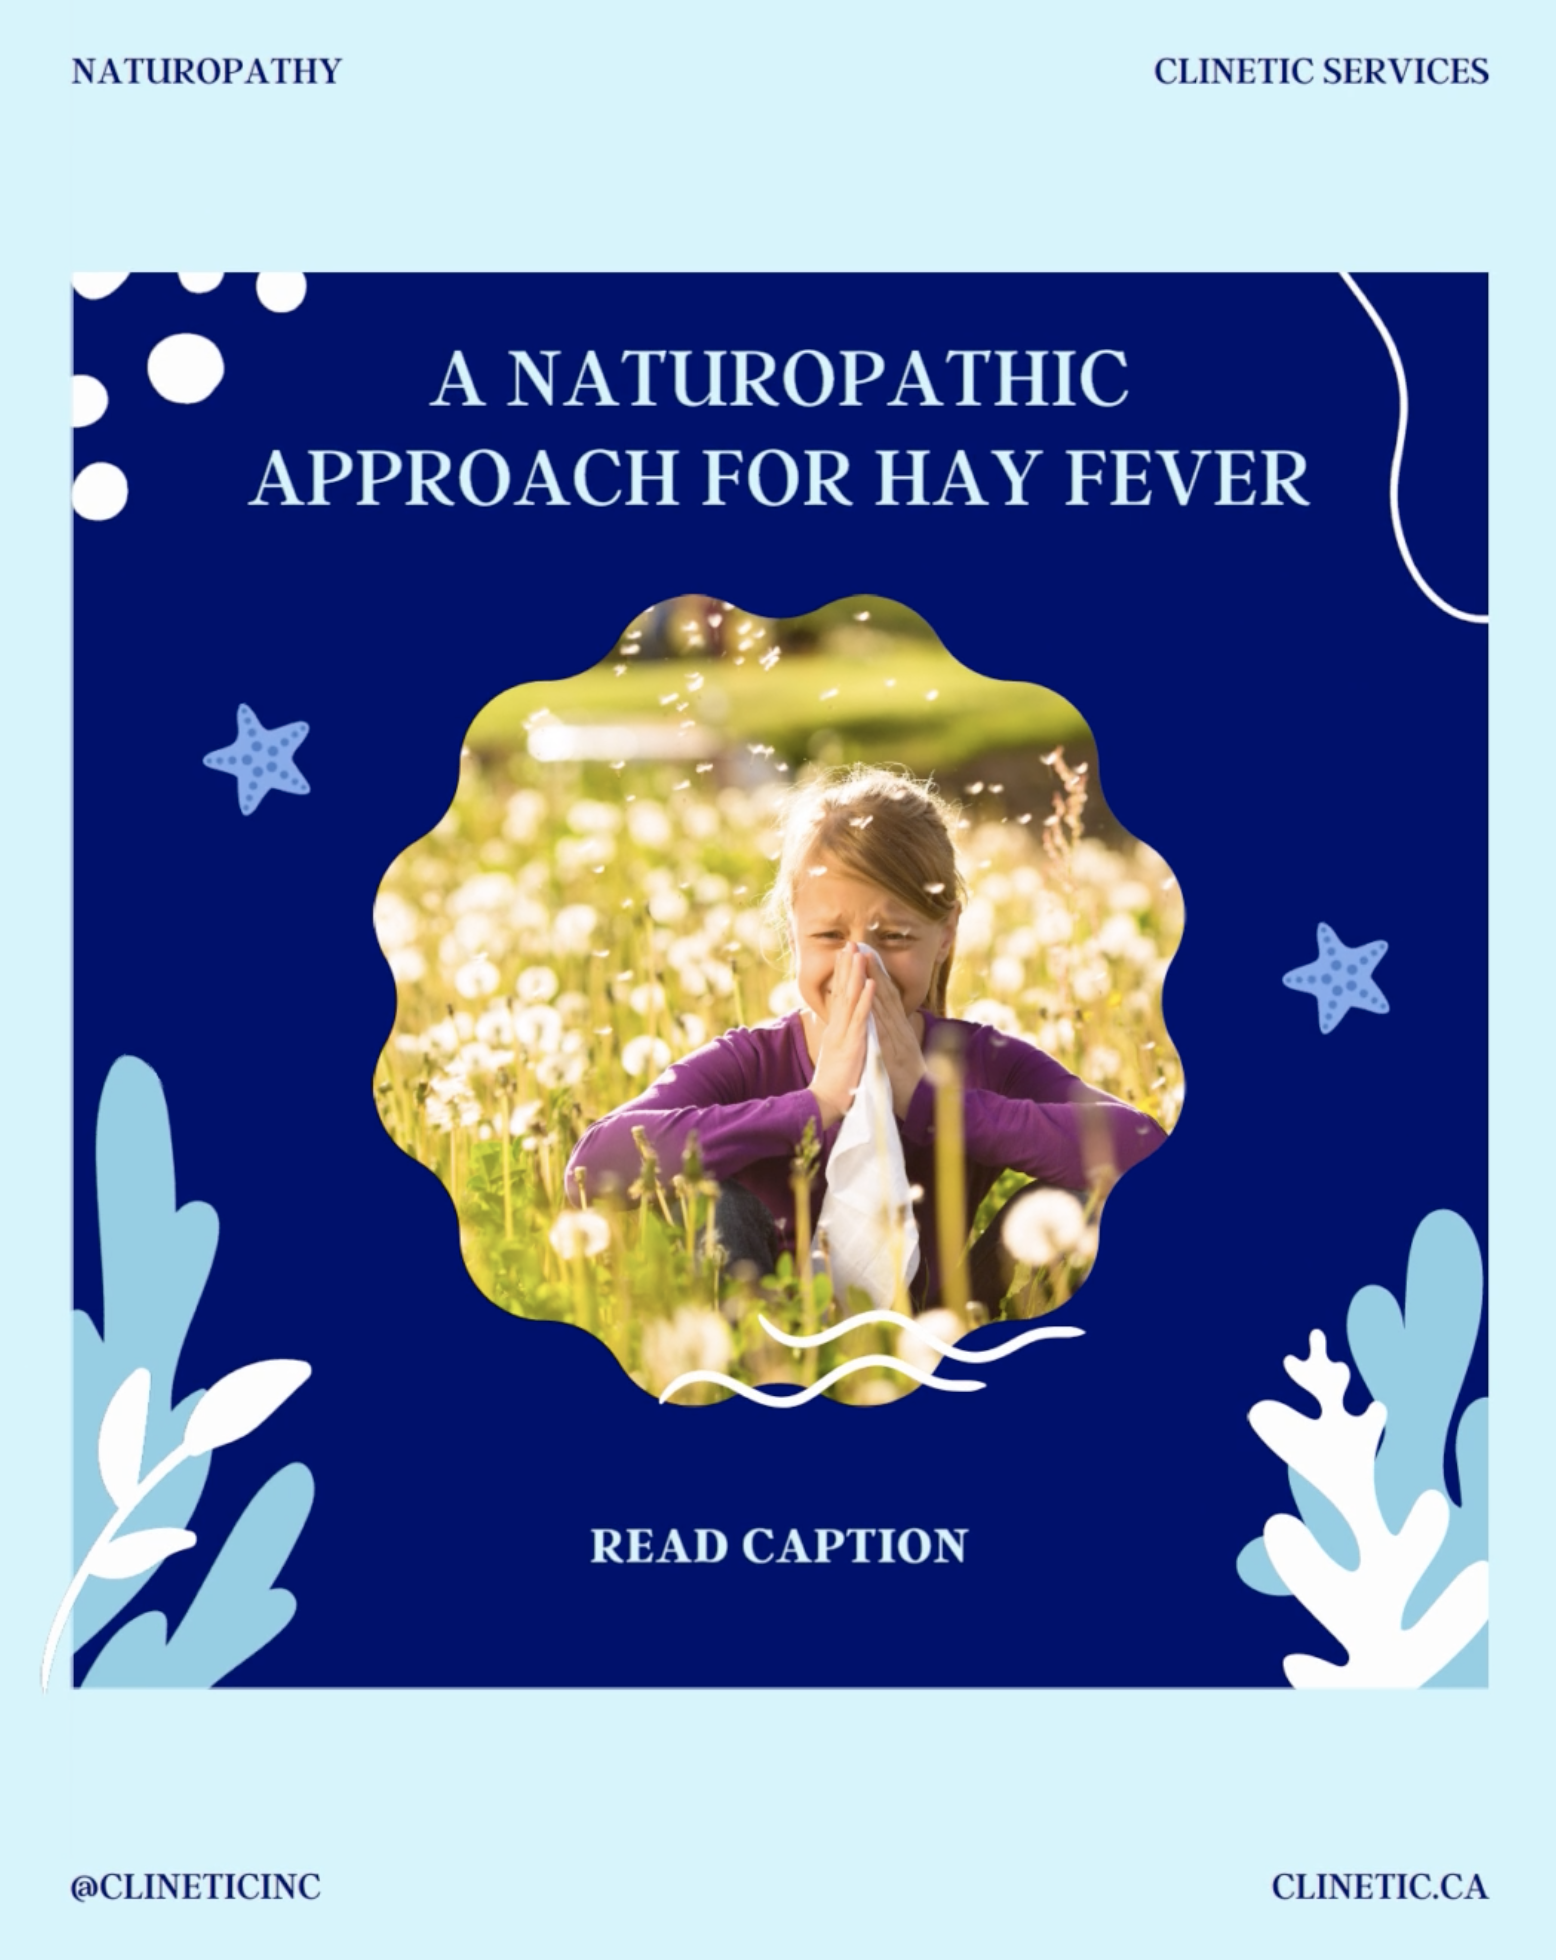 Hay fever is a type of environmental allergy